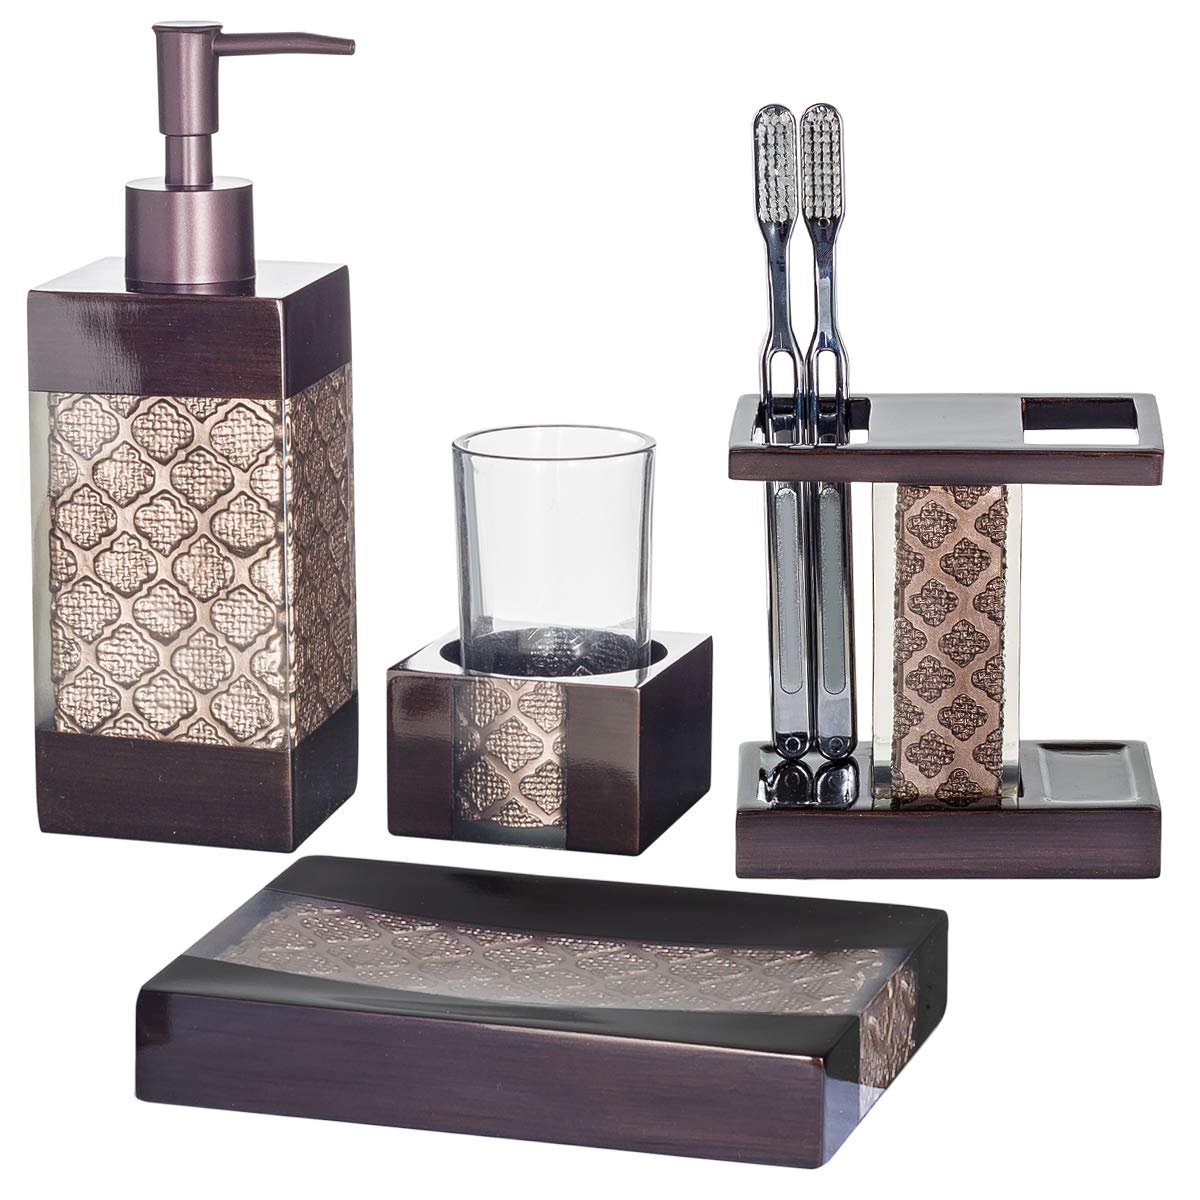 Creative Scents Bronze Bathroom Accessories Sets Complete - Decorative Bathroom Accessory Set - 4 Pc Bathroom Set Includes: Soap Dispenser, Toothbrush Holder, Tumbler and Soap Dish (Dahlia Collection)  - Like New